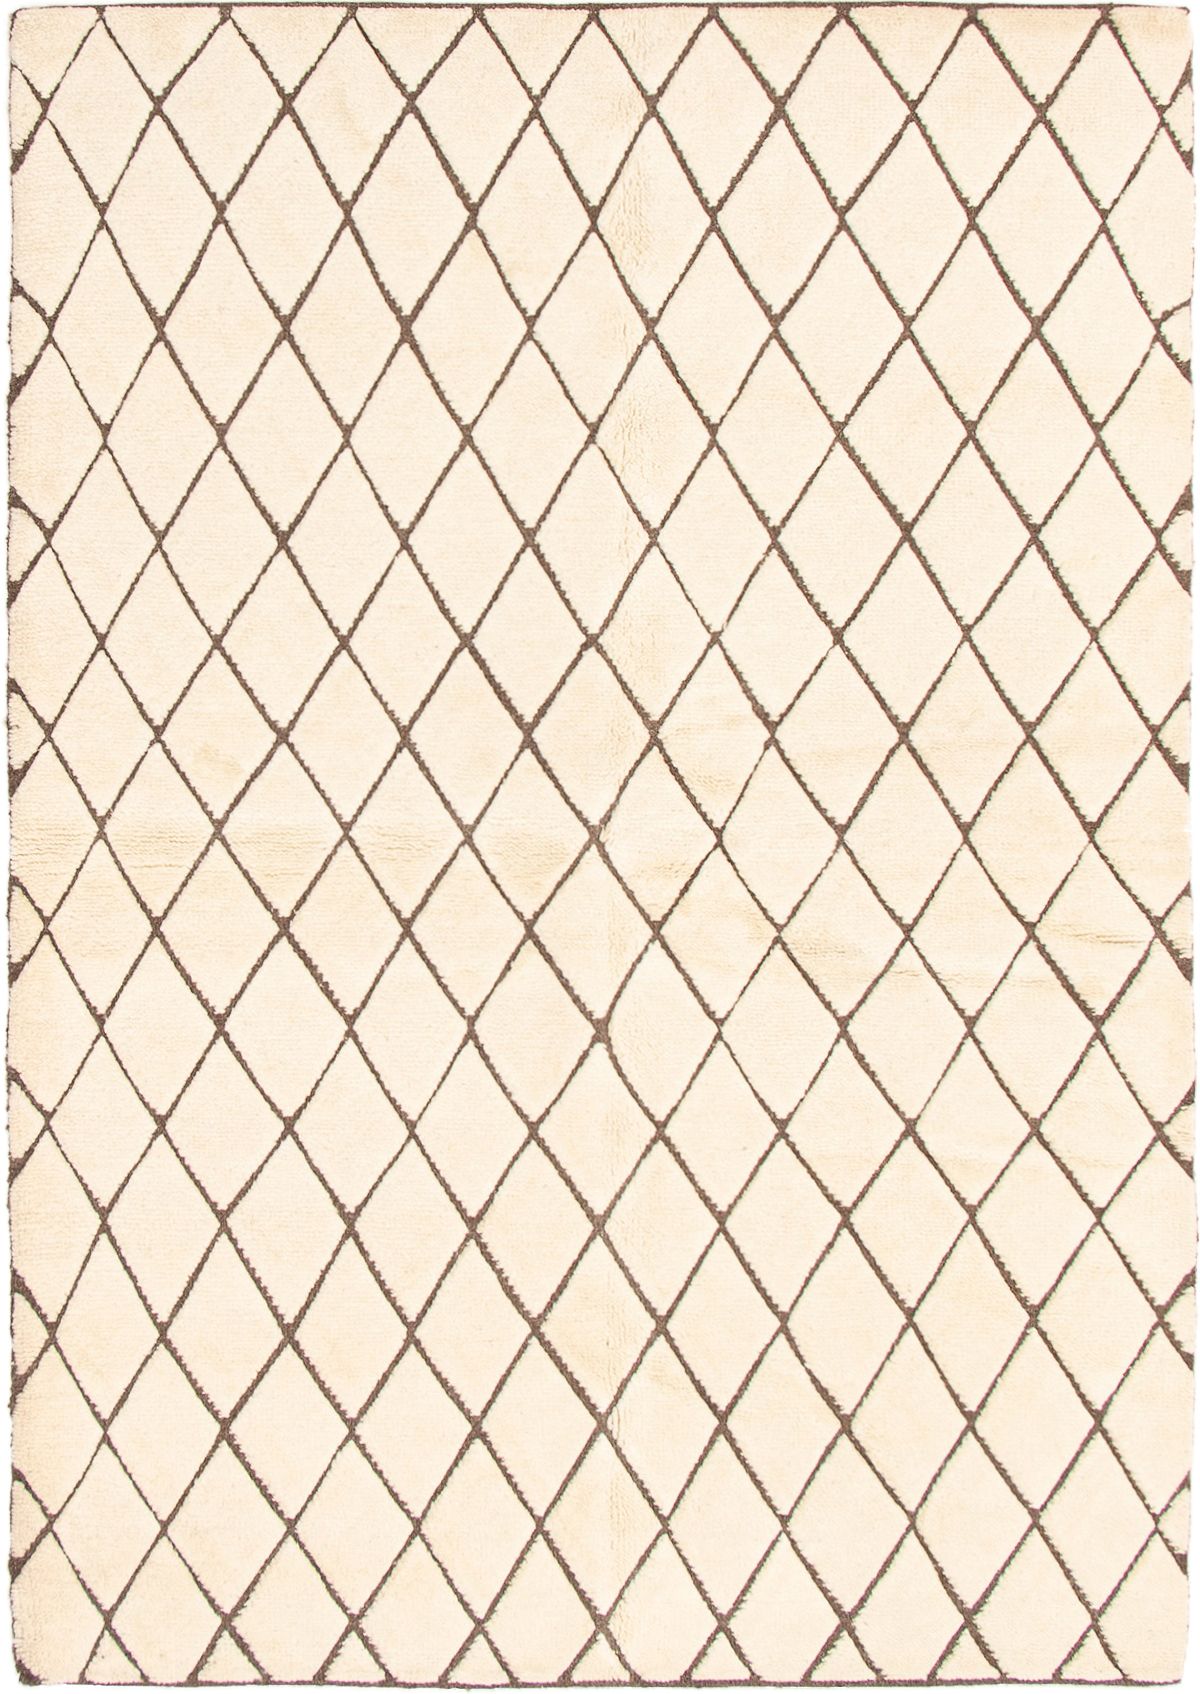 Hand-knotted Arlequin Cream Wool Rug 6'3" x 9'1" Size: 6'3" x 9'1"  